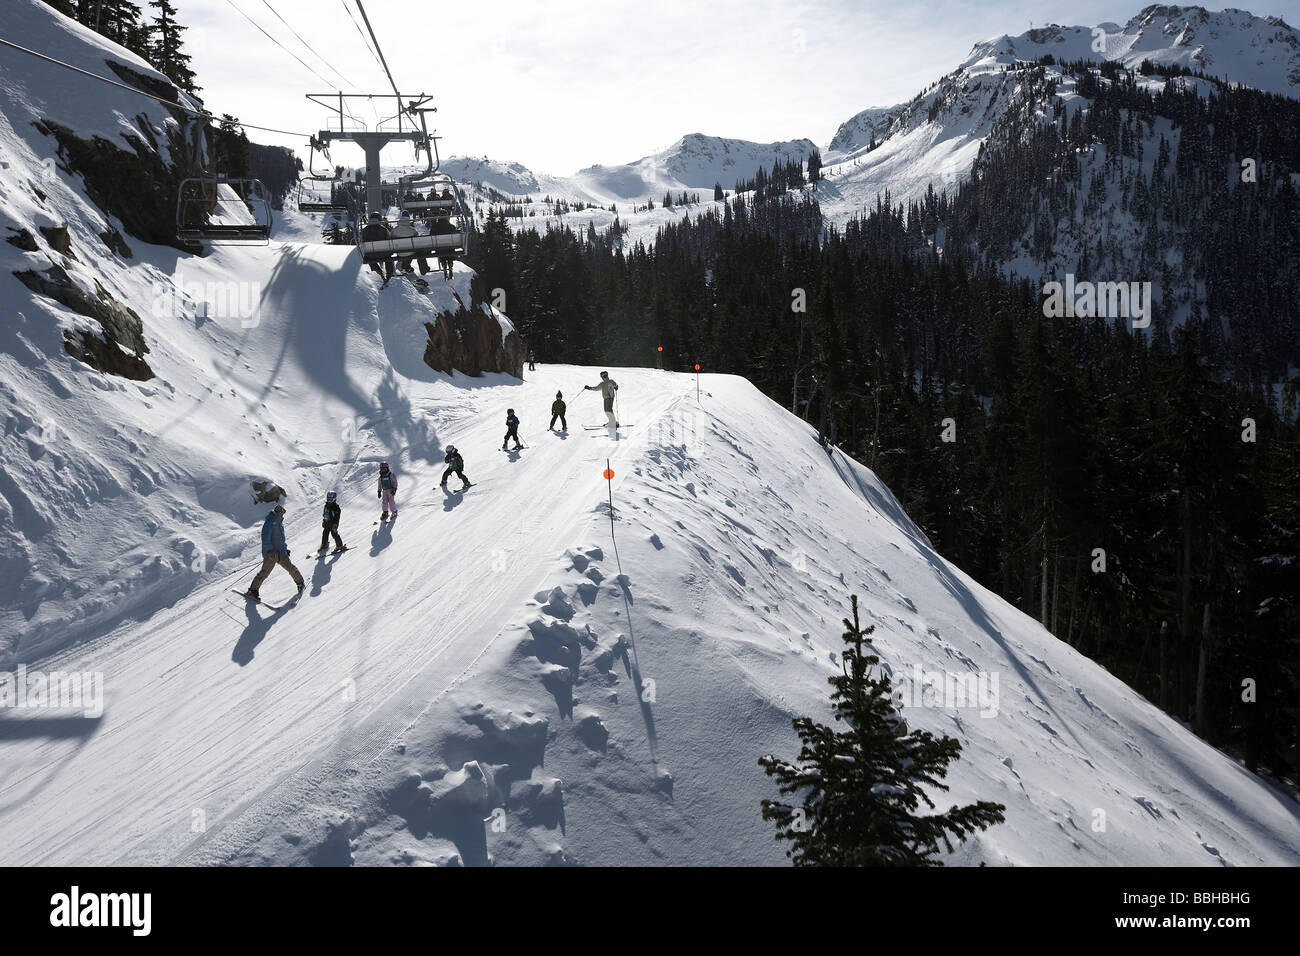 Children learning to ski on the slopes of Whistler mountain British Columbia Canada Stock Photo